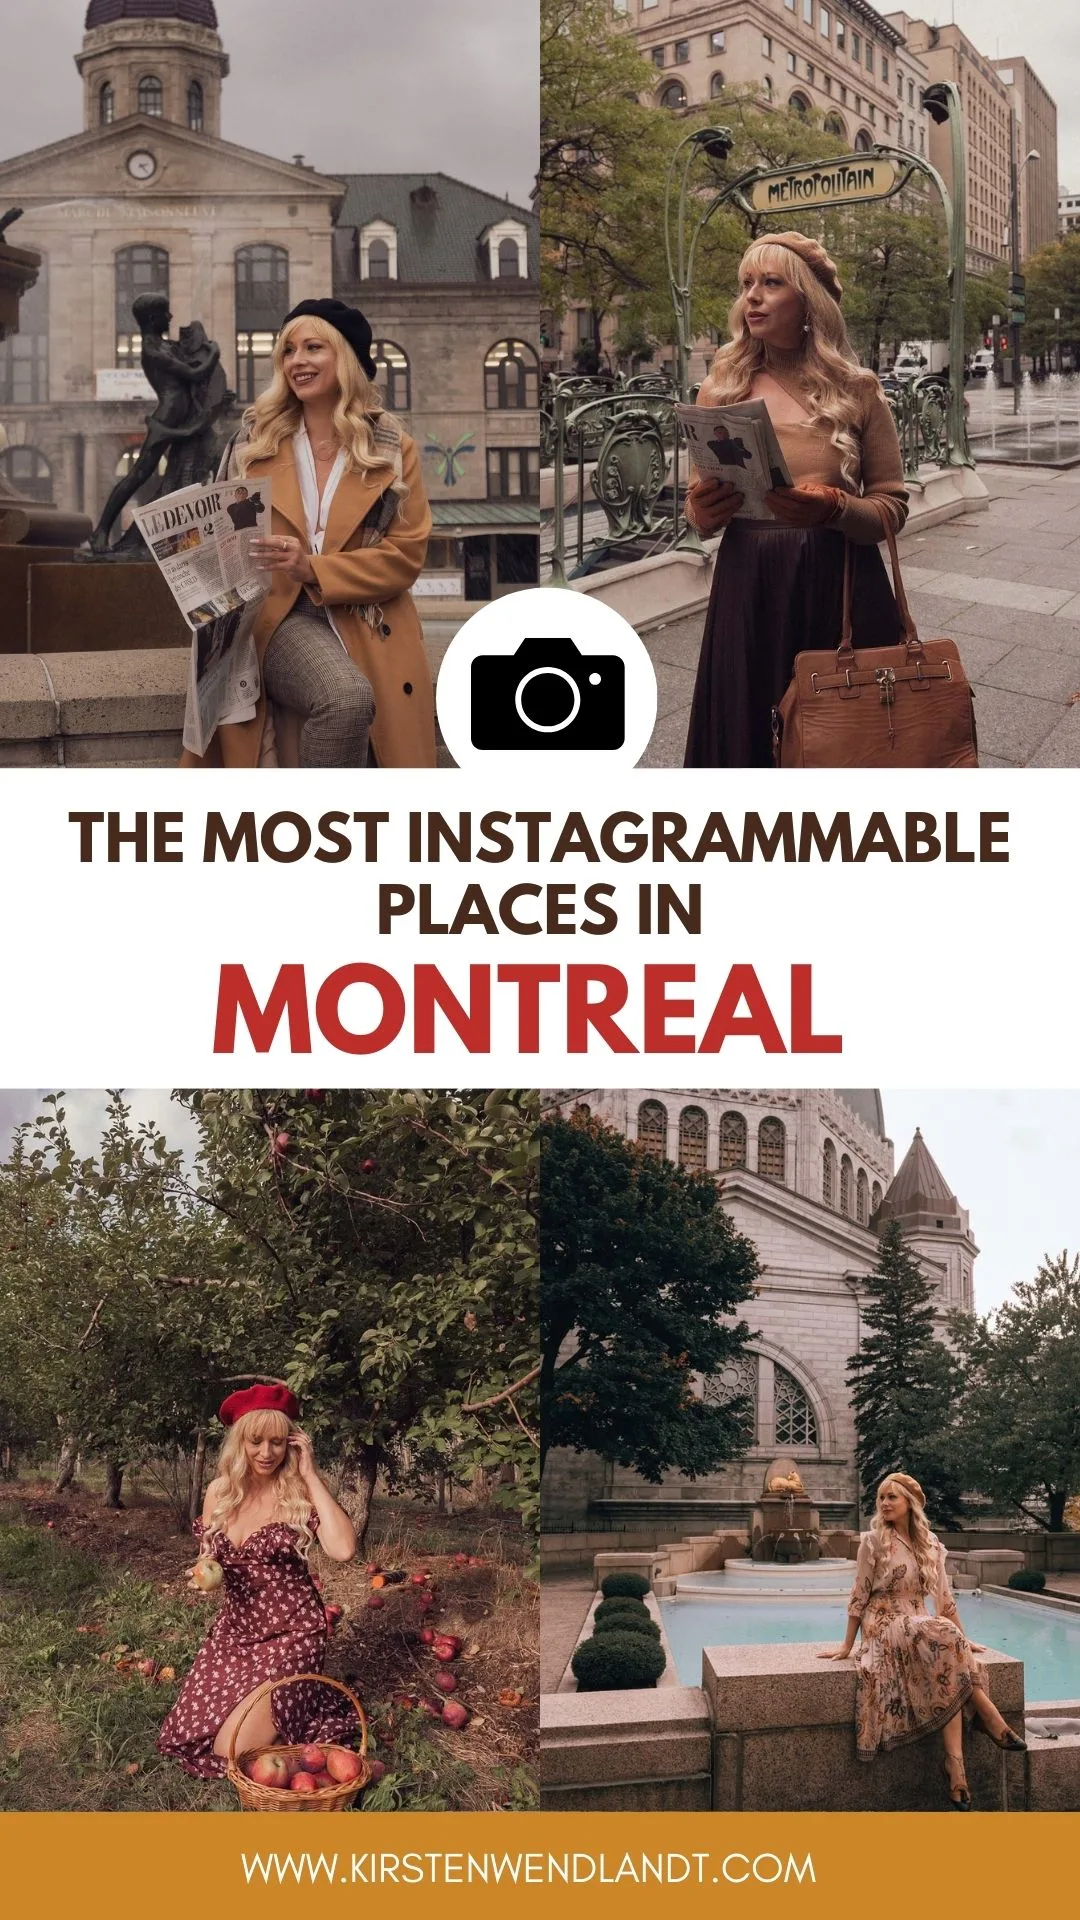 Montreal feels like a little slice of Europe in Canada, and it's no surprise that most people who visit immediately fall in love with it's old world charm. From the gorgeous old architecture, cute cafes and cobblestoned streets, and beautiful parks, there's more than enough places here to snap your next instagram photo. If you're planning on visiting Montreal soon and hoping to get some great photos while you're there, you definitely won't want to miss this guide on the most instagrammables places in Montreal!